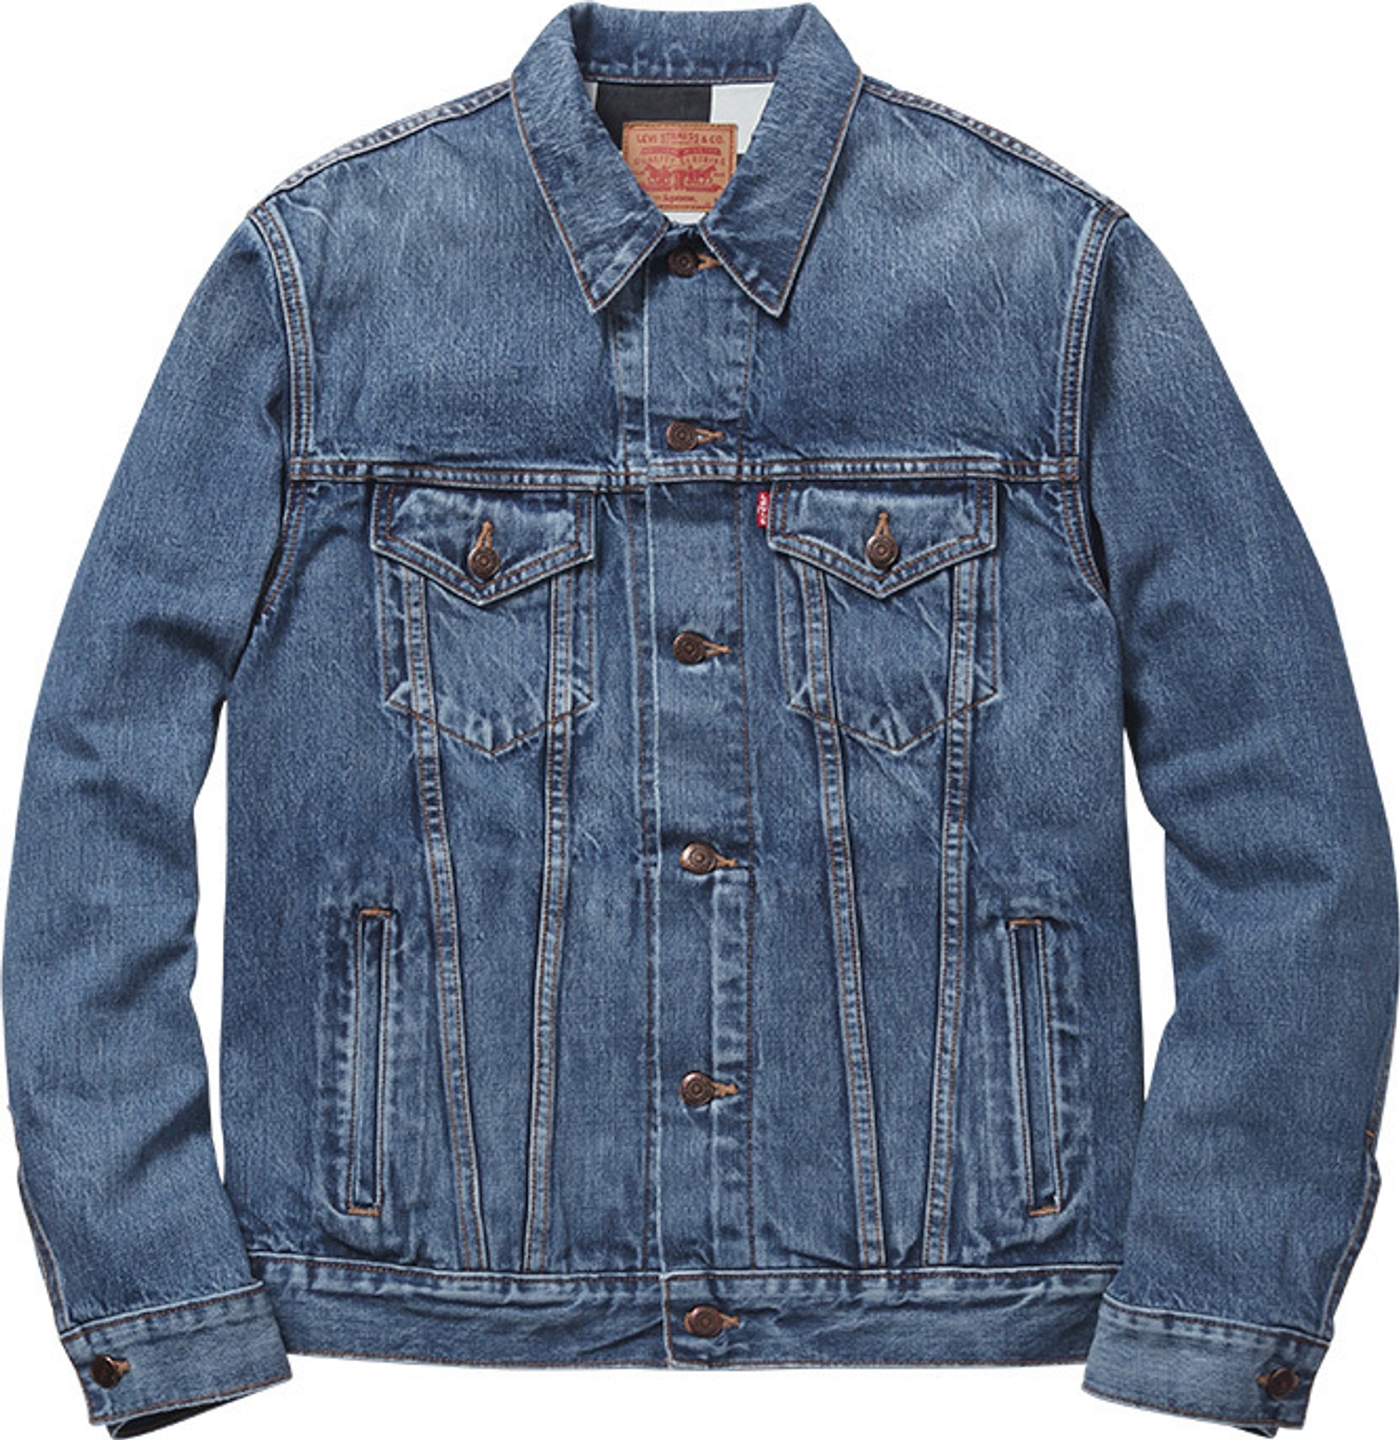 Custom fit Trucker Jacket 
Cotton 13 oz. selvedge denim with cotton twill lining.<br>Made In The U.S.A. (3/9)